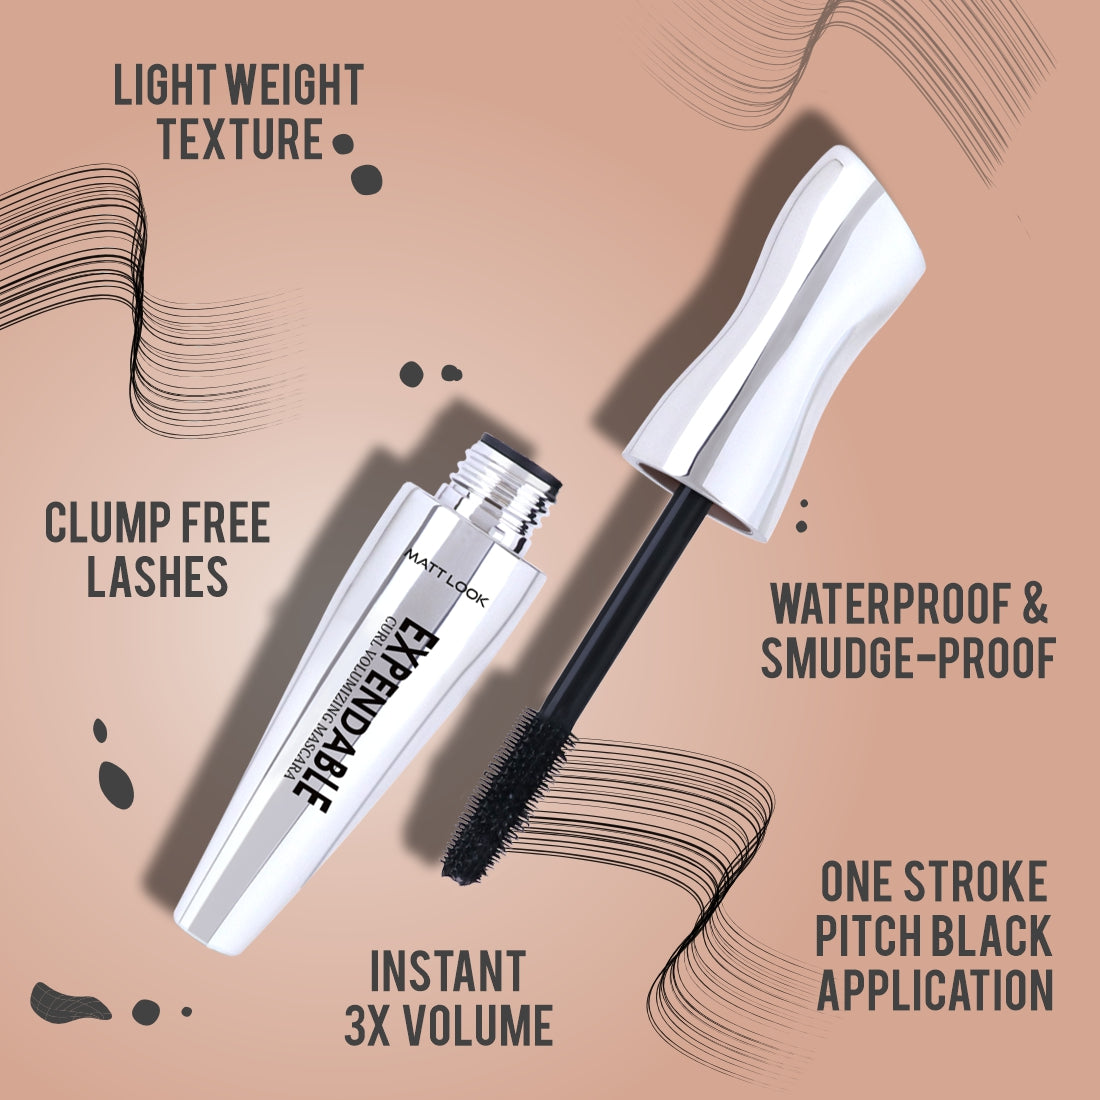 Mattlook Expendable Curl Volumizing Mascara, Instant 3X Volume, Clump- Free lashes, Water Proof, Lifts lashes effortlessly